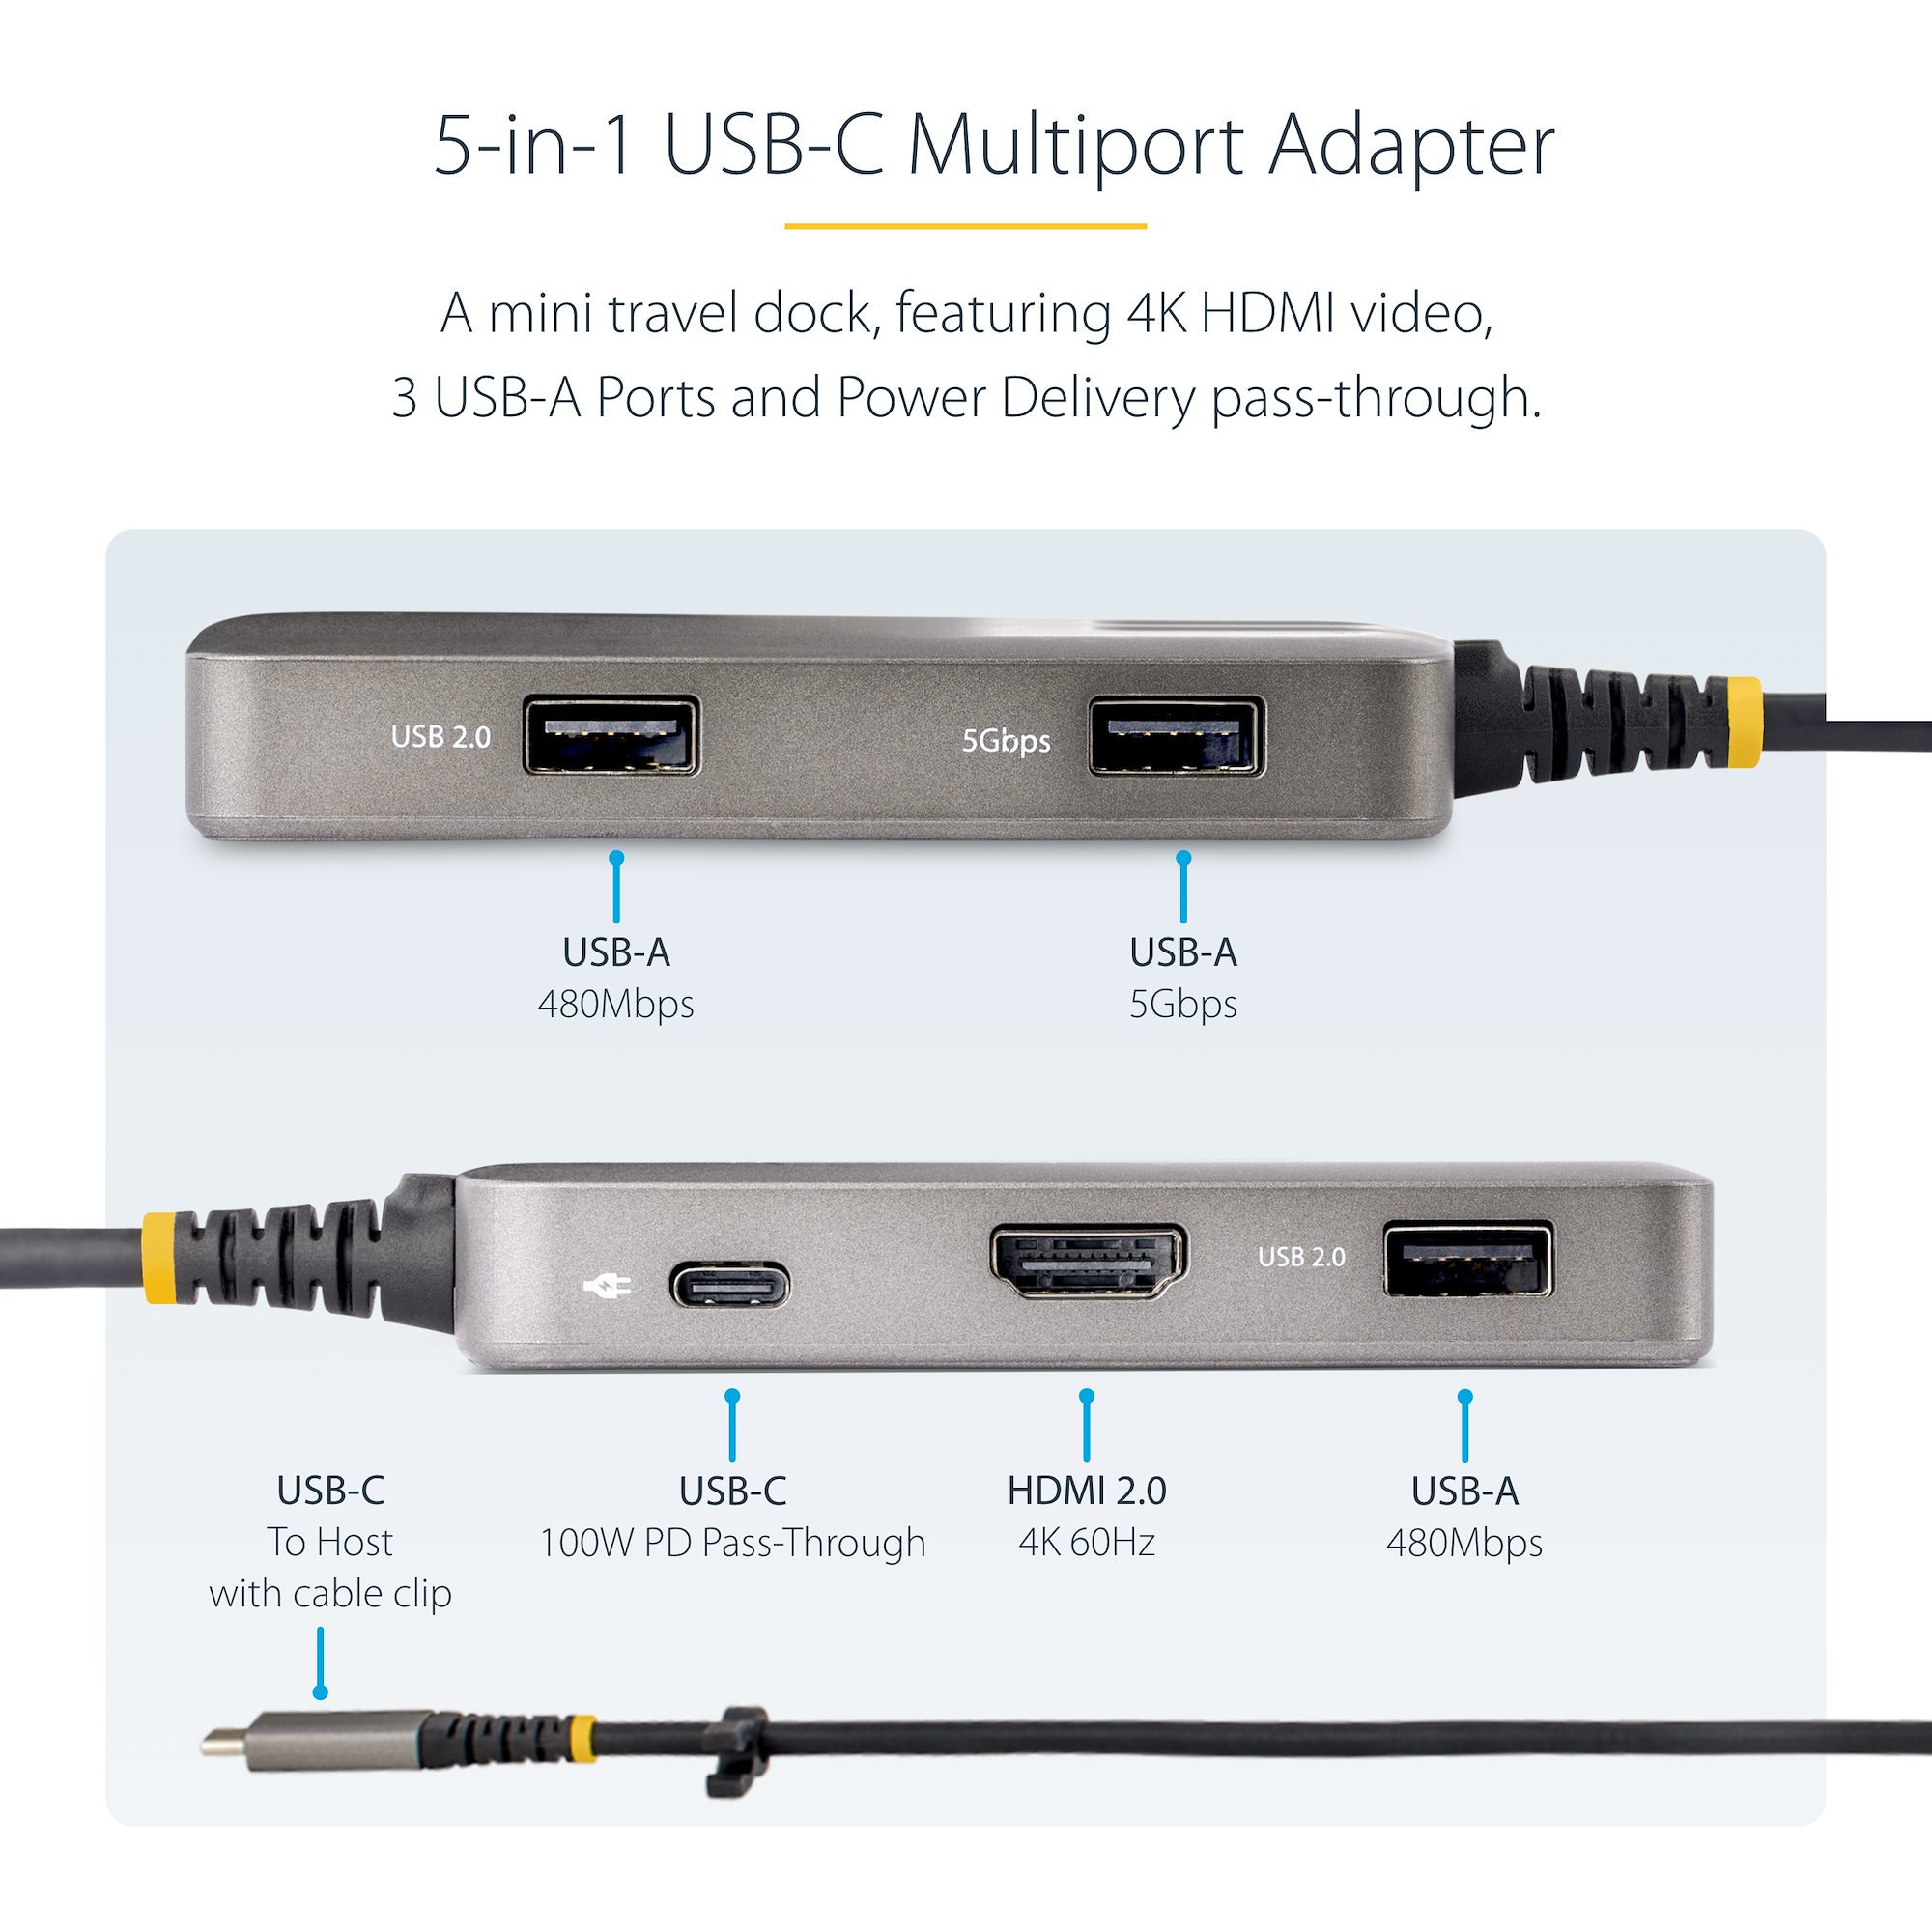 USB-C Multiport Adapter, 4K 60Hz HDMI w/HDR, 3-Port USB Hub, 100W Power  Delivery Pass-Through, USB Type C Mini Docking Station,